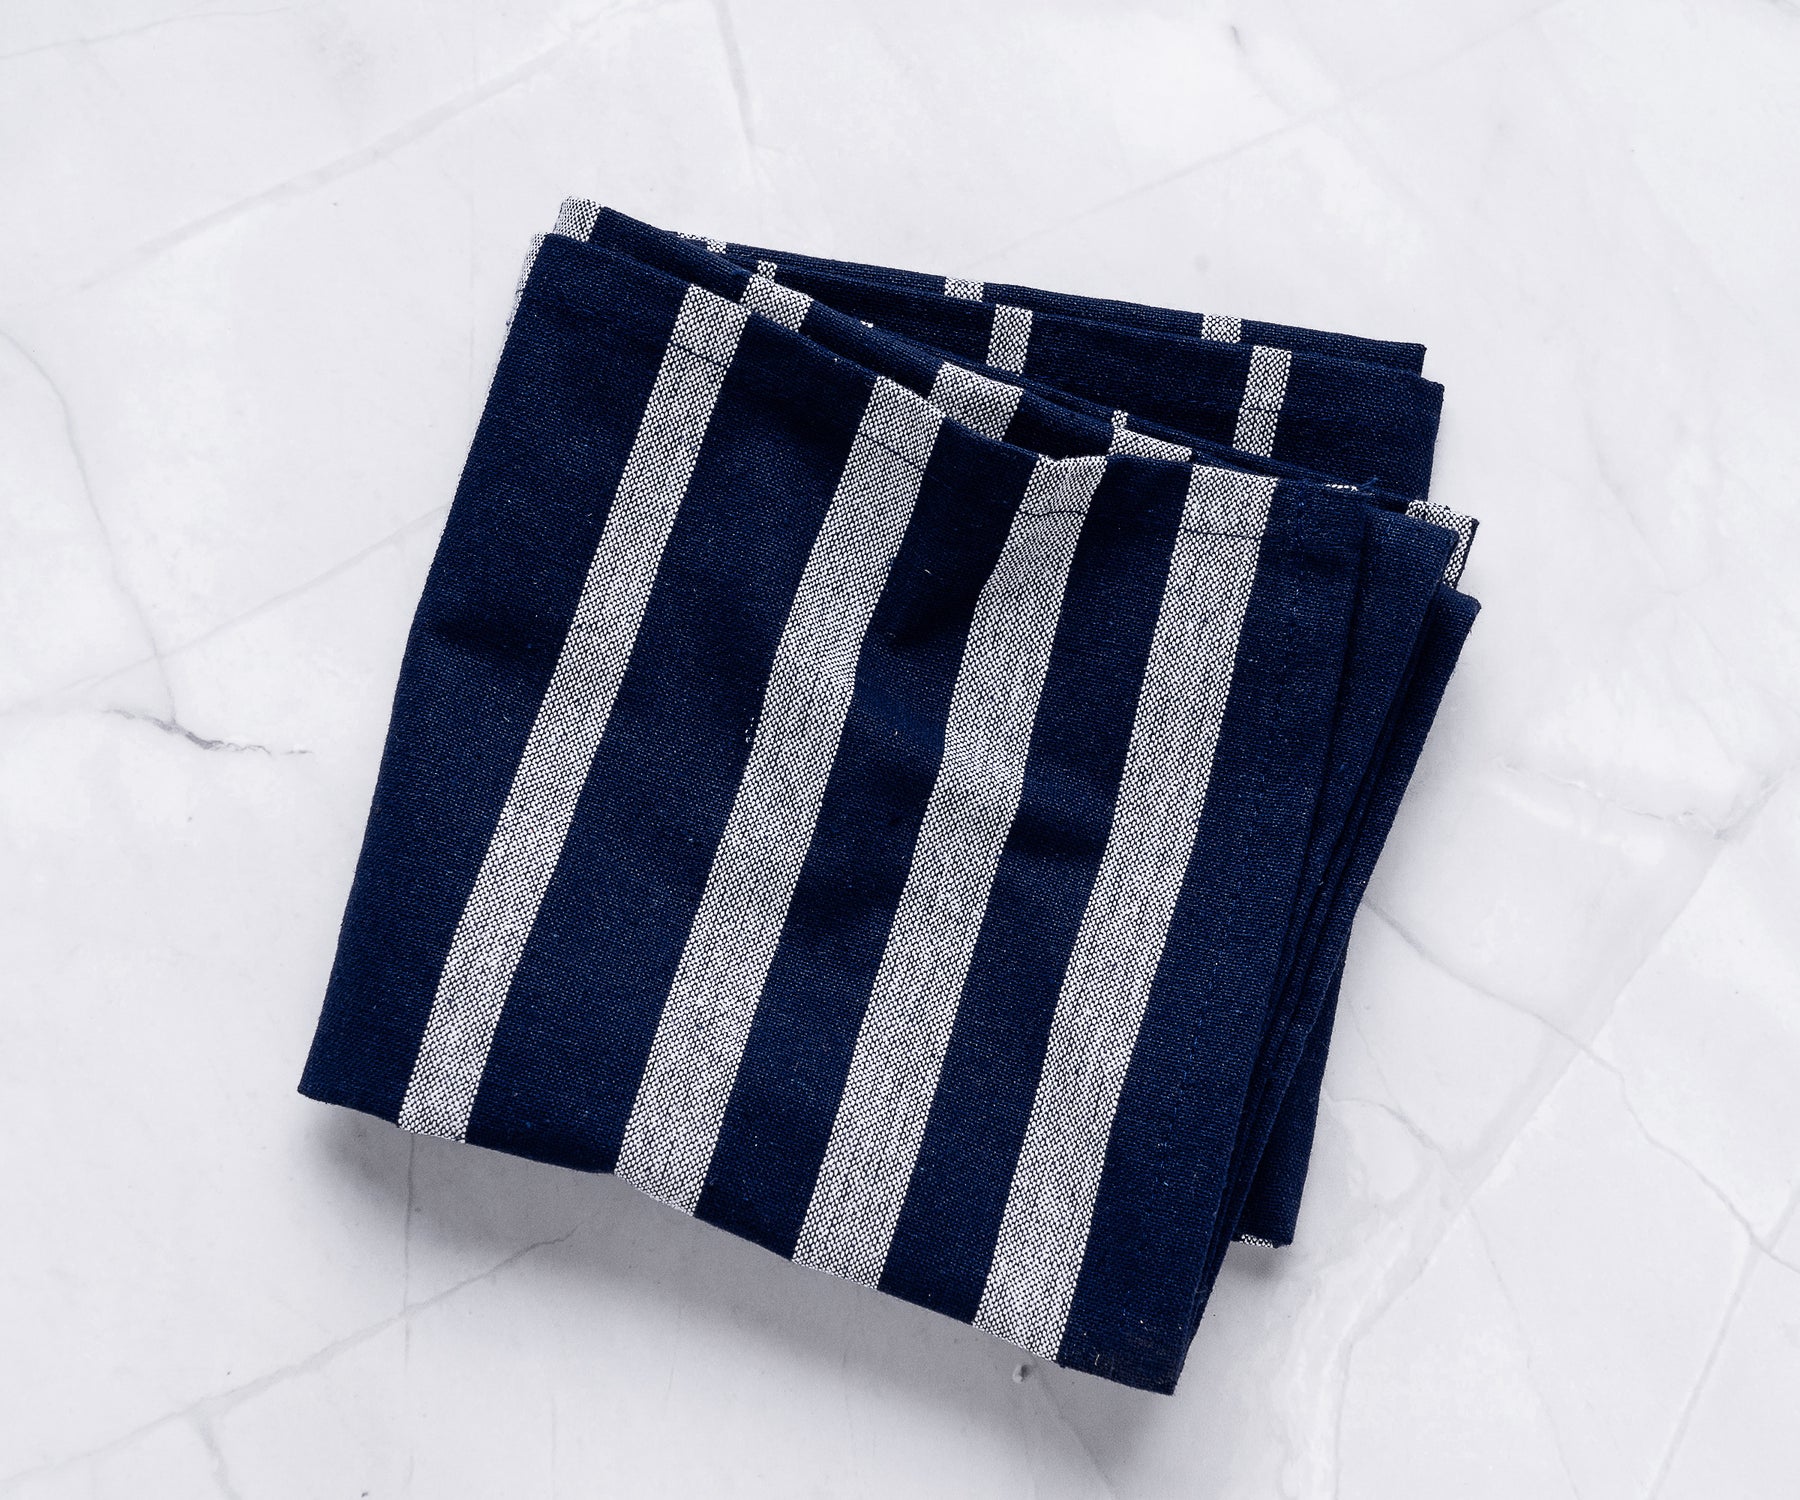 Dish Cloths for Washing Dishes, Thanksgiving Kitchen Towels, Red Kitchen Towels, Absorbent Kitchen Towels, Kitchen Dish Cloths, Farmhouse Kitchen Towels, Cotton Hand Towels, Kitchen Dish Cloths, Kitchen Tea Towels.Two rectangular dish towels with blue and white stripes